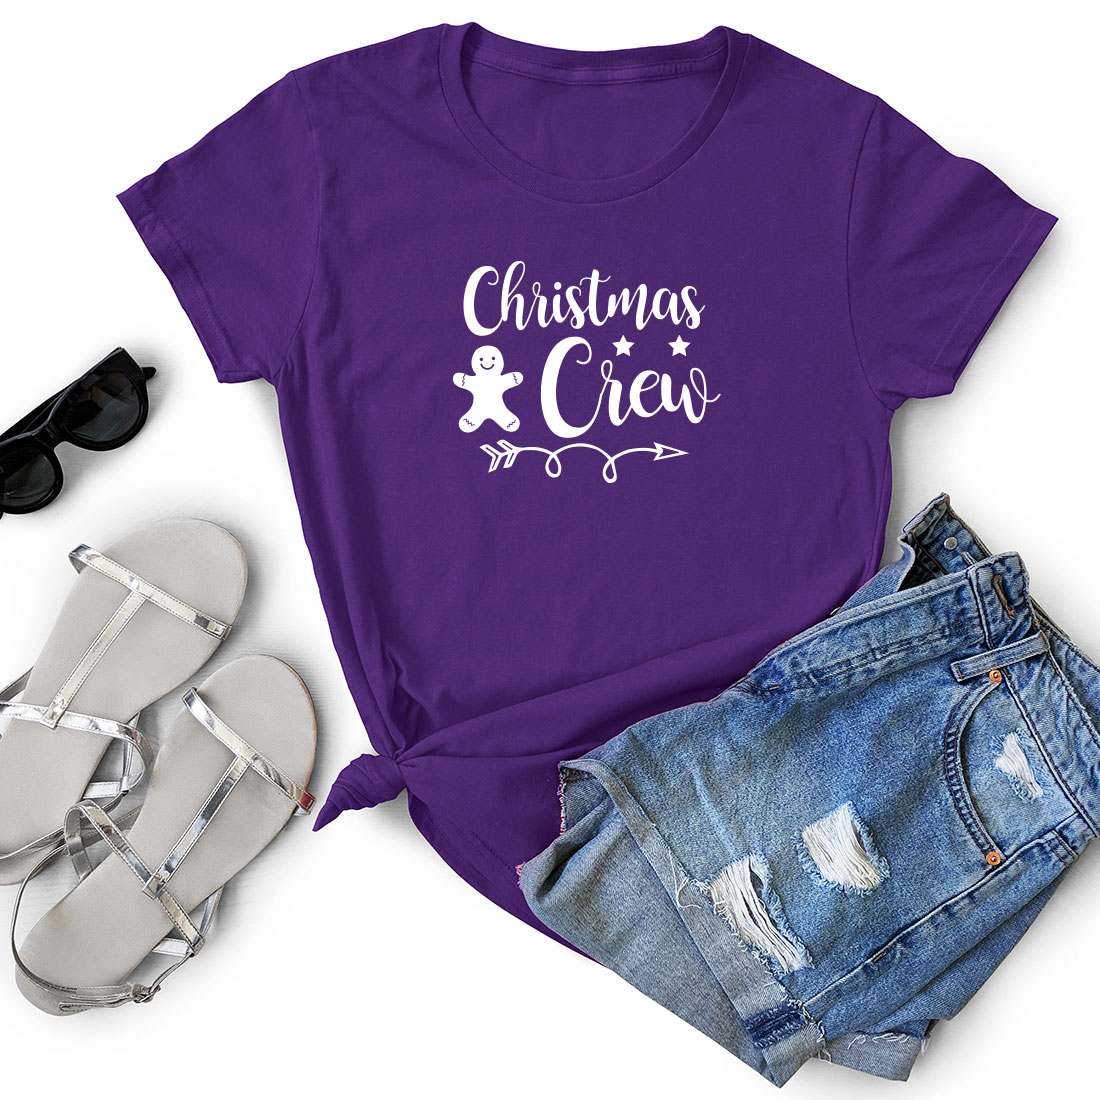 T - shirt that says christmas cica on it next to a pair of.